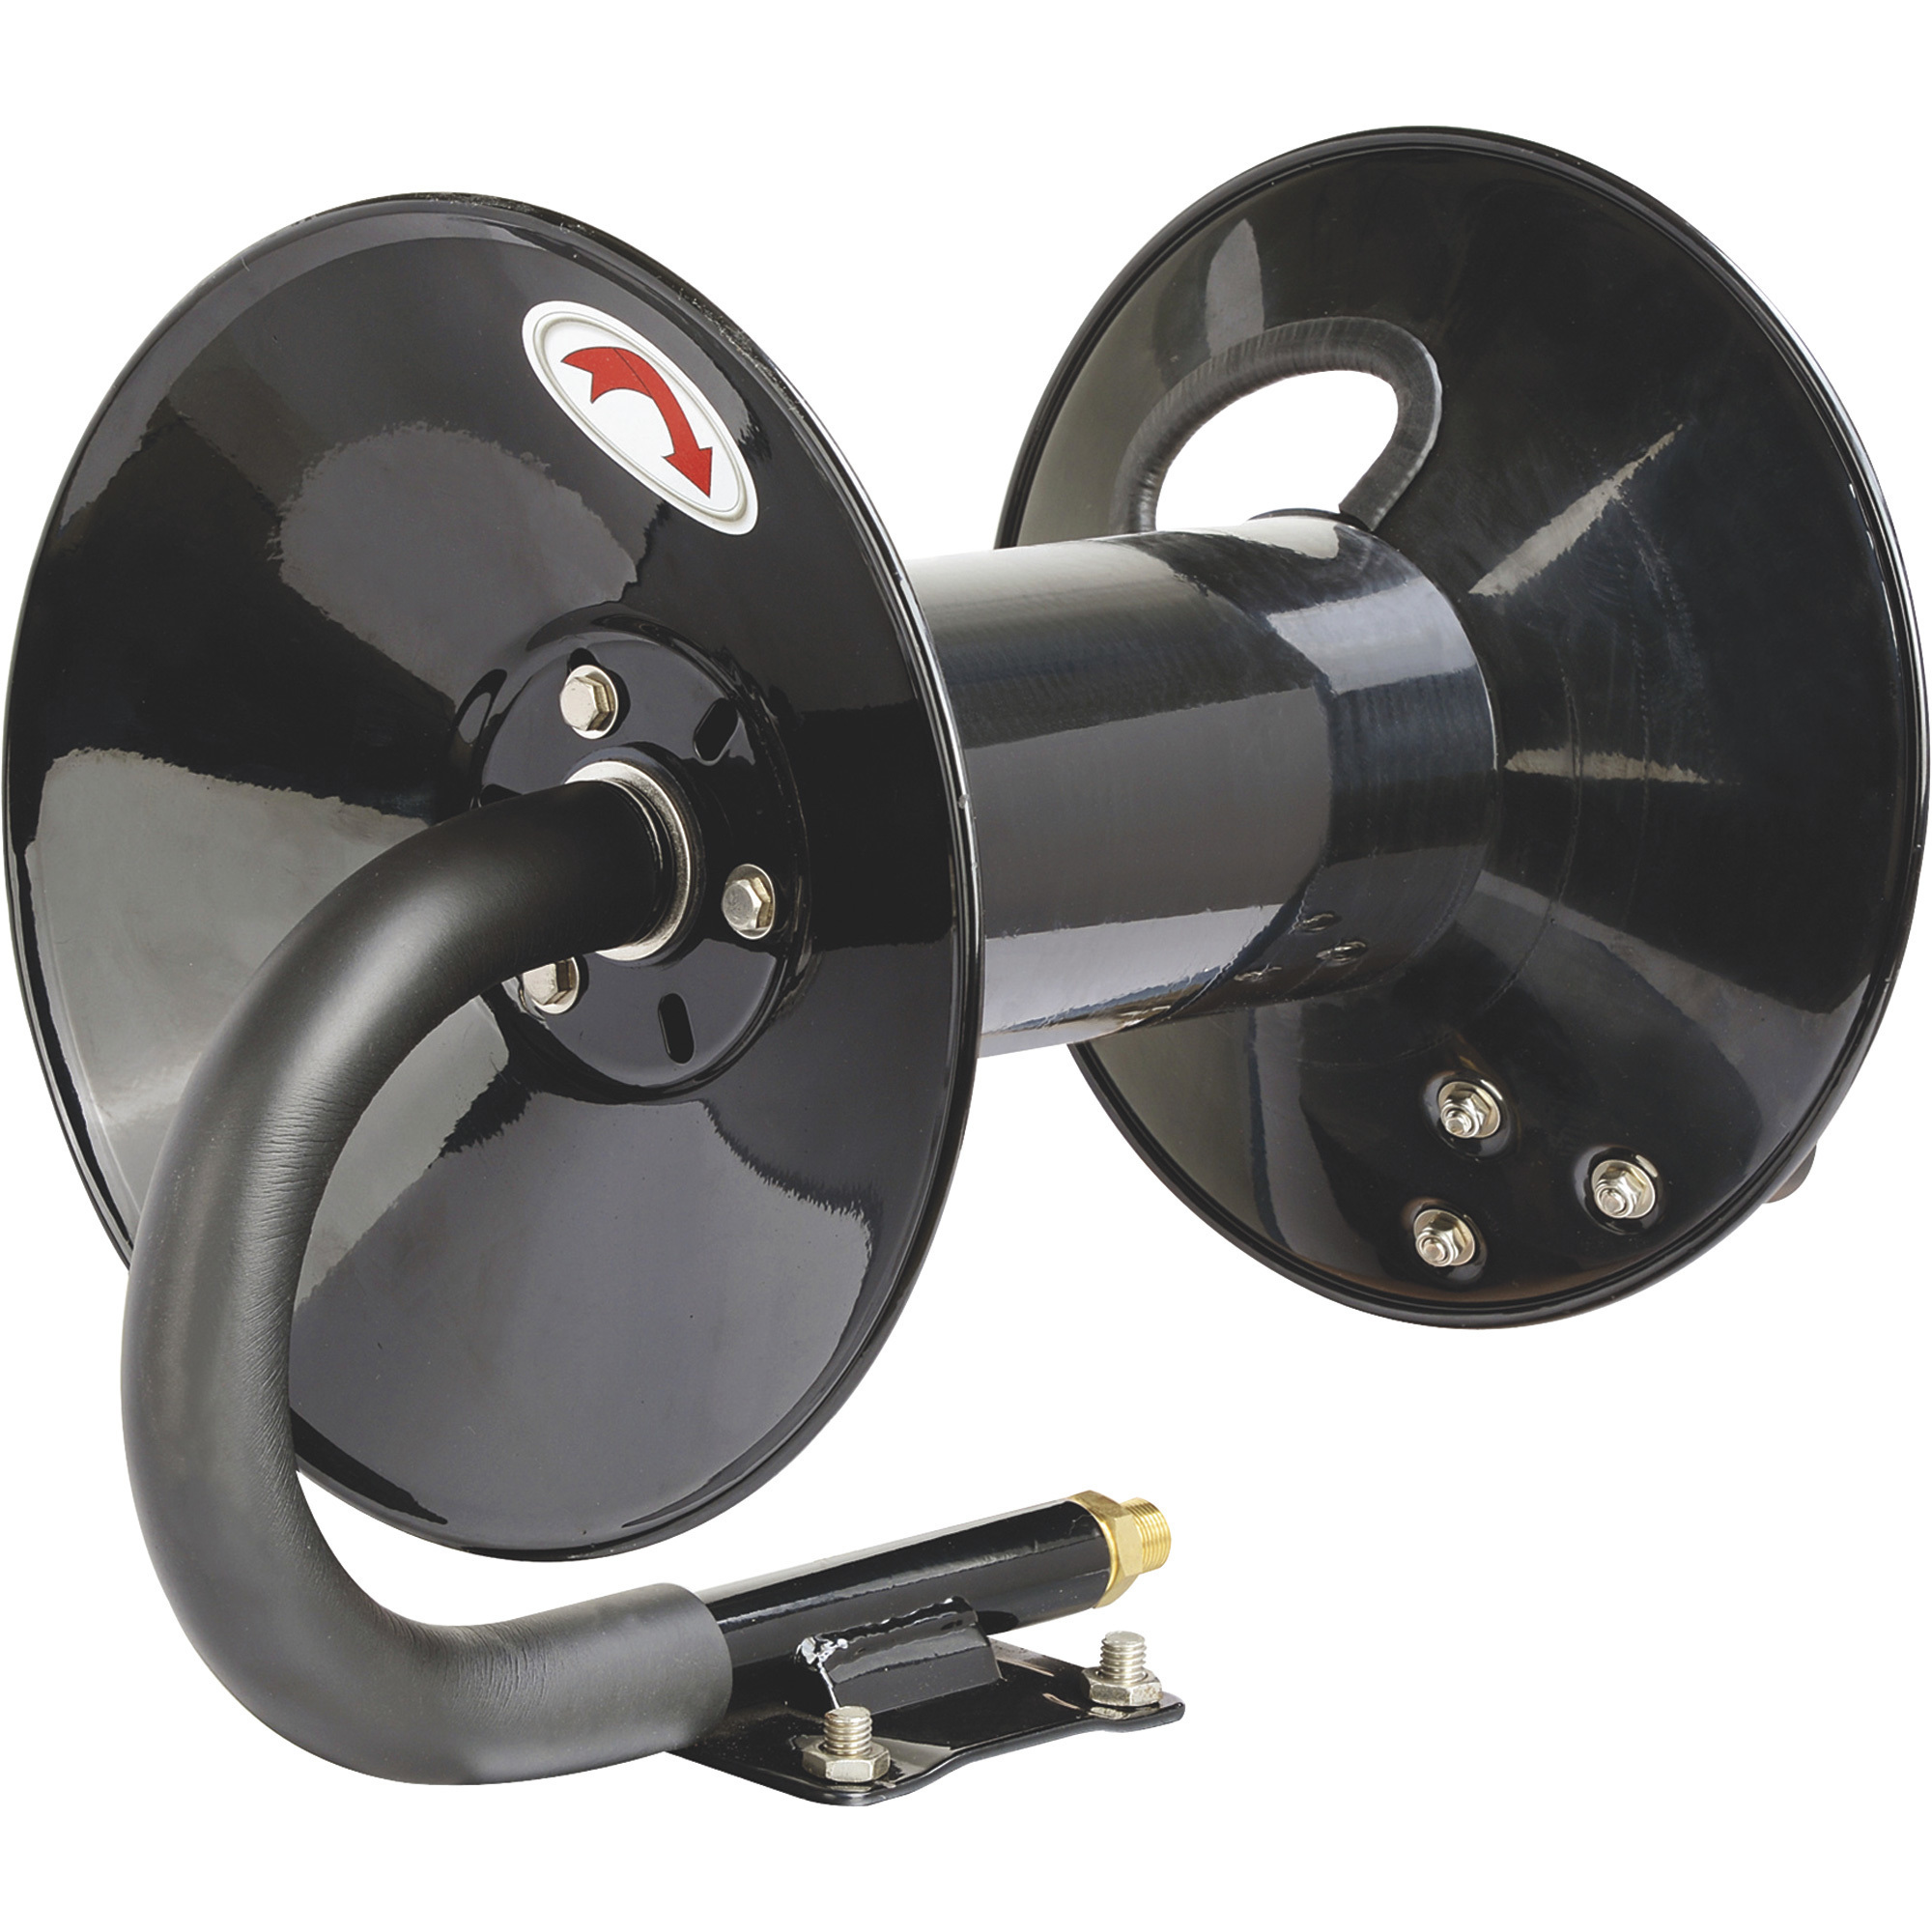 Ironton Air Hose Reel with Hand Brake - Holds 3/8in. x 100ft. Hose